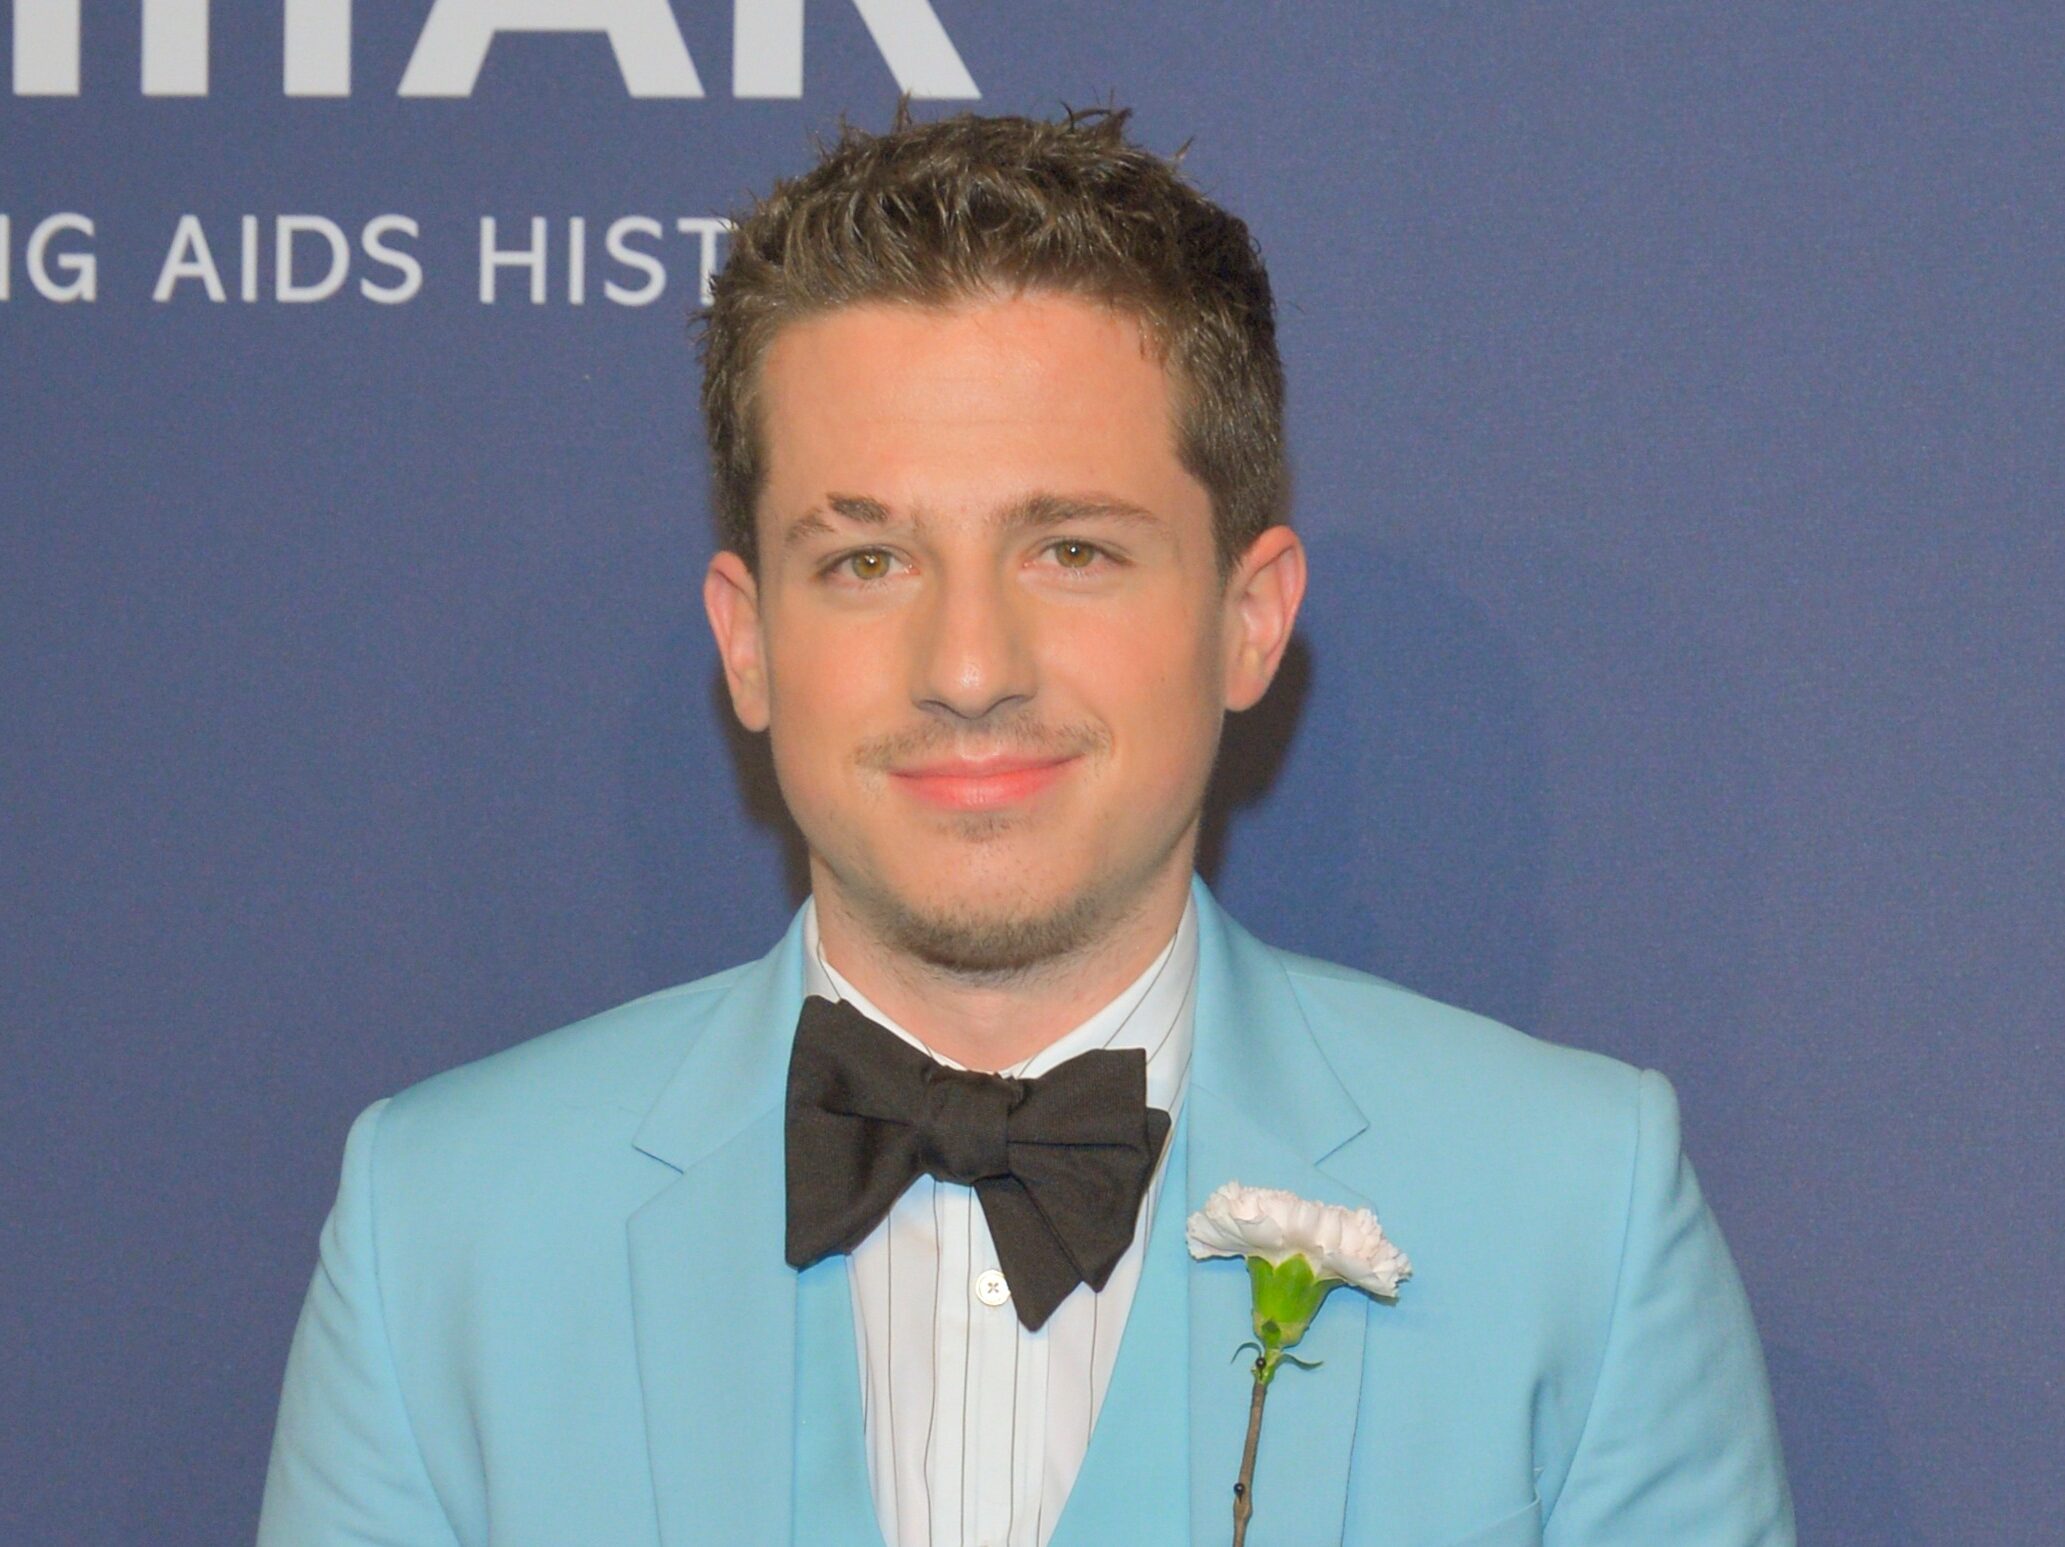 Charlie Puth wearing a powder blue suit at the 2020 New York Gala